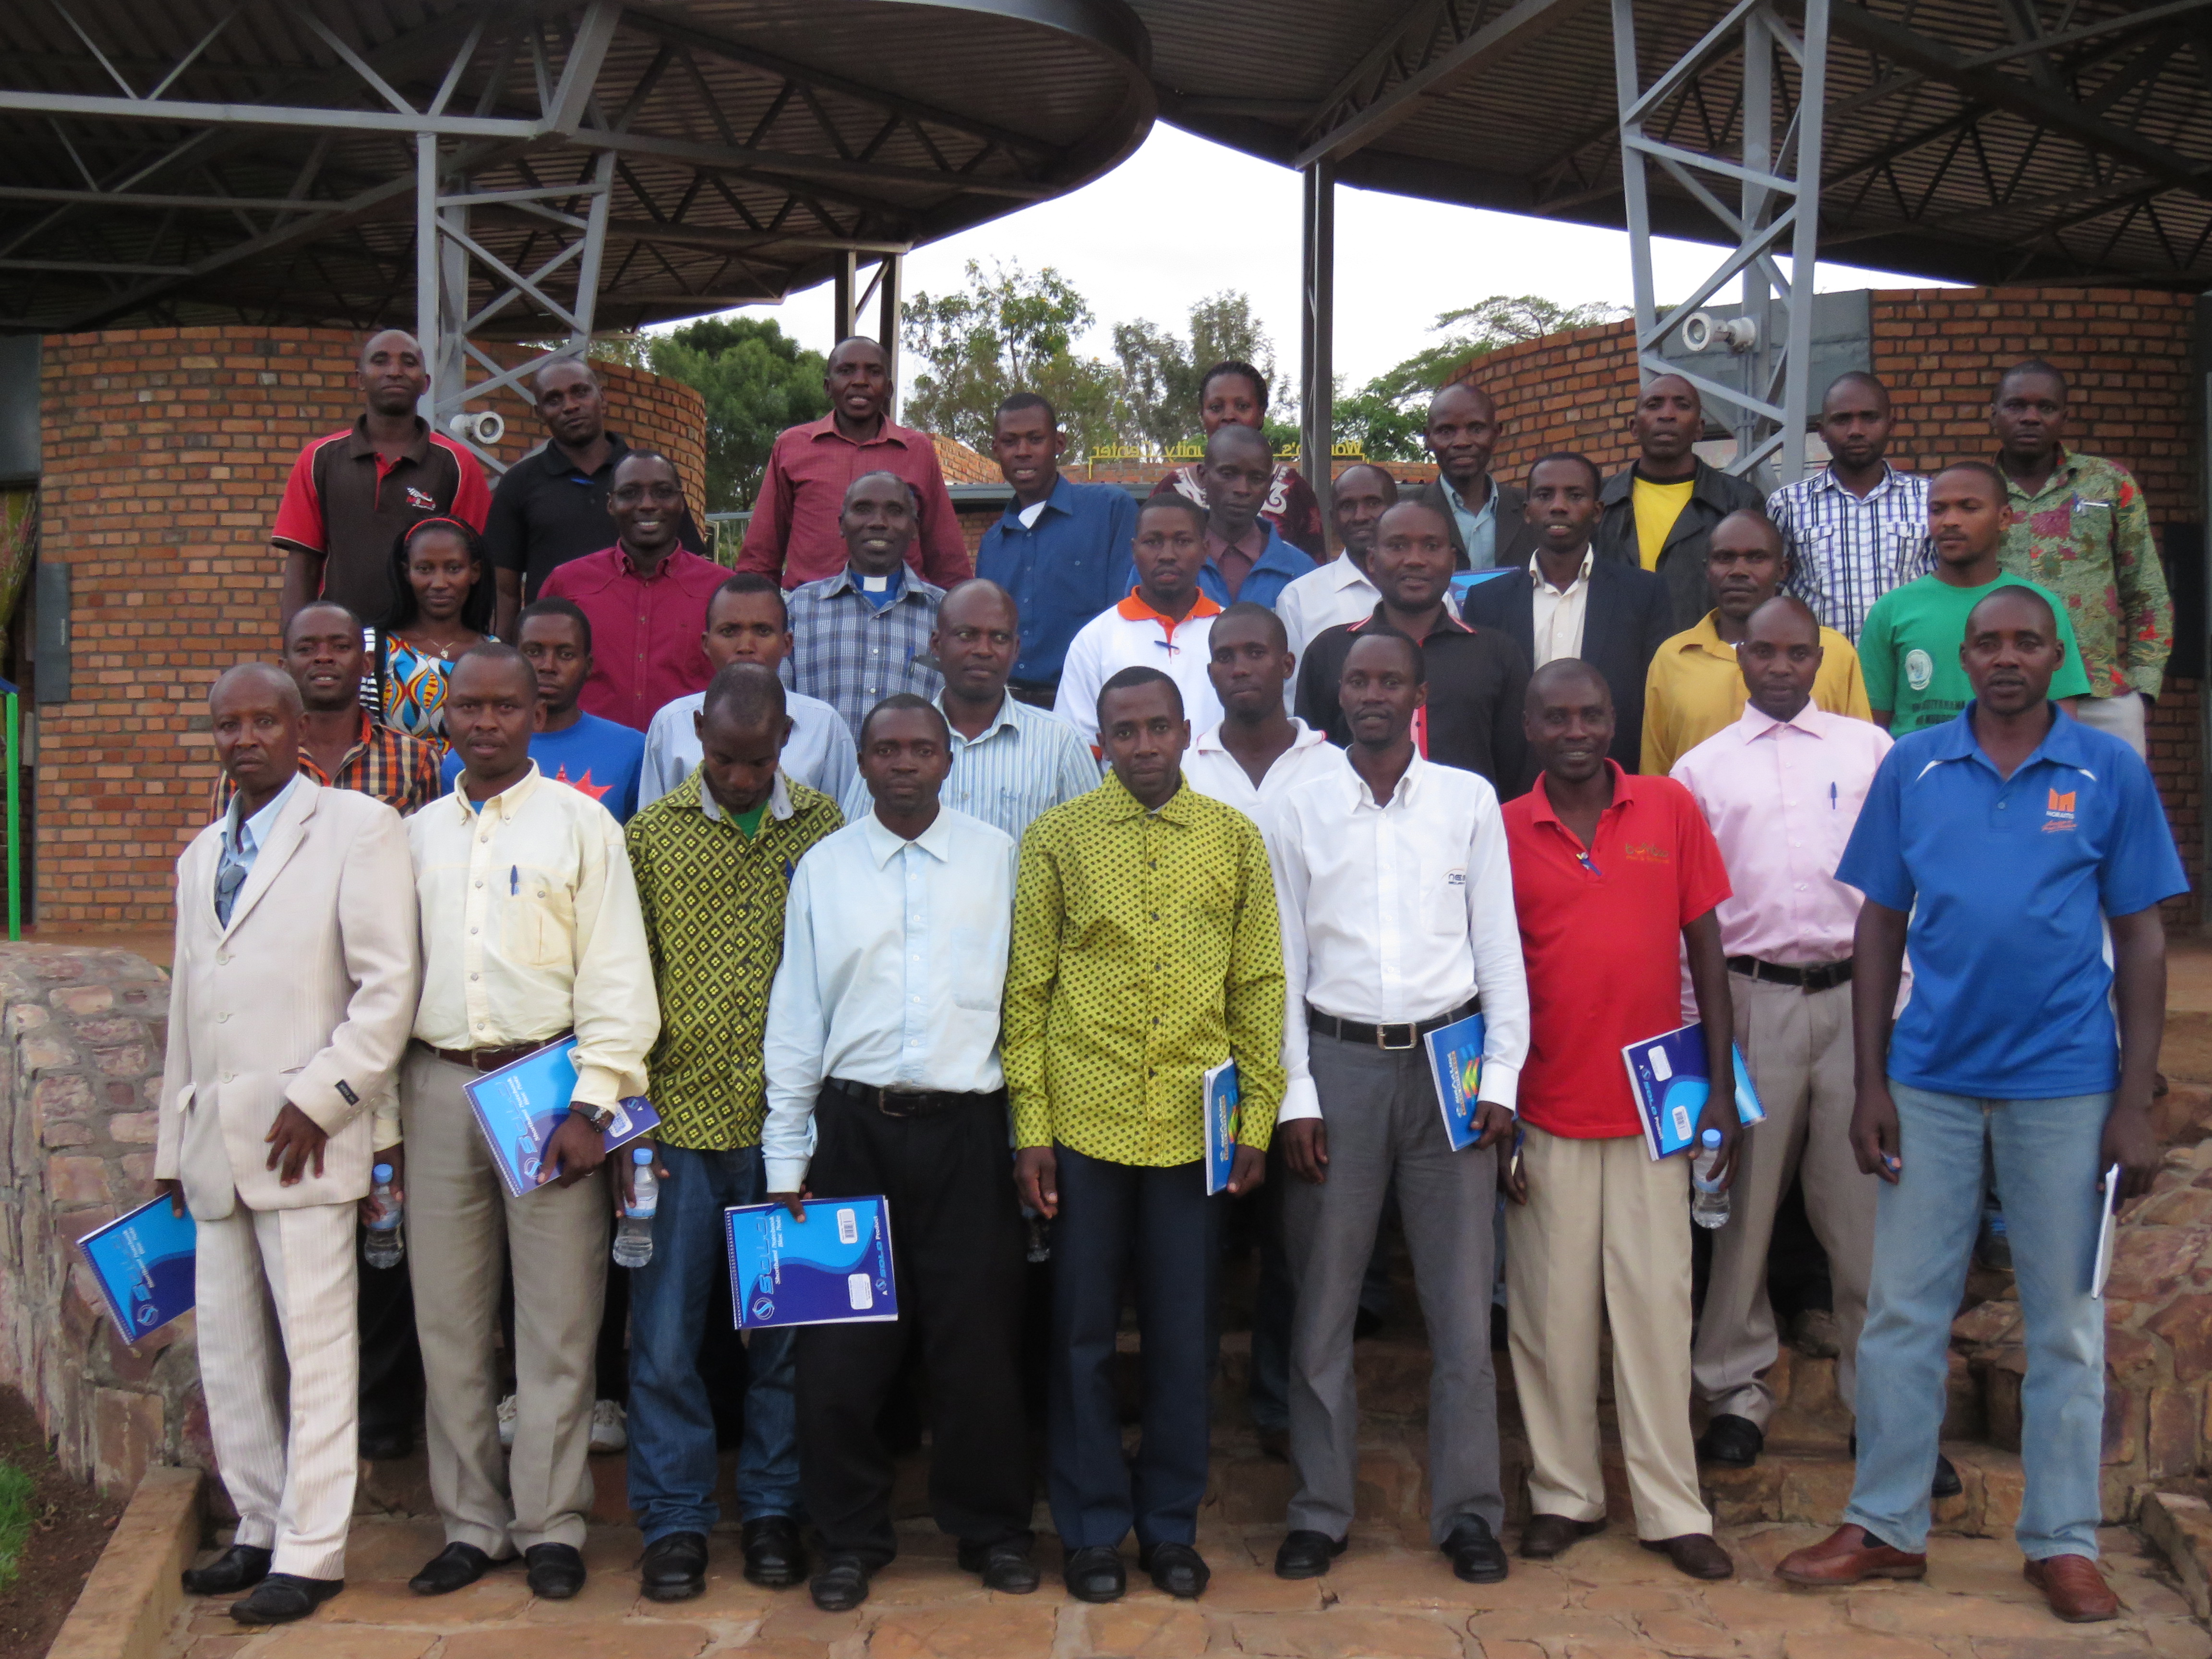 This class of Men's Engagement program graduates in Rwanda will share what they've learned with their communities